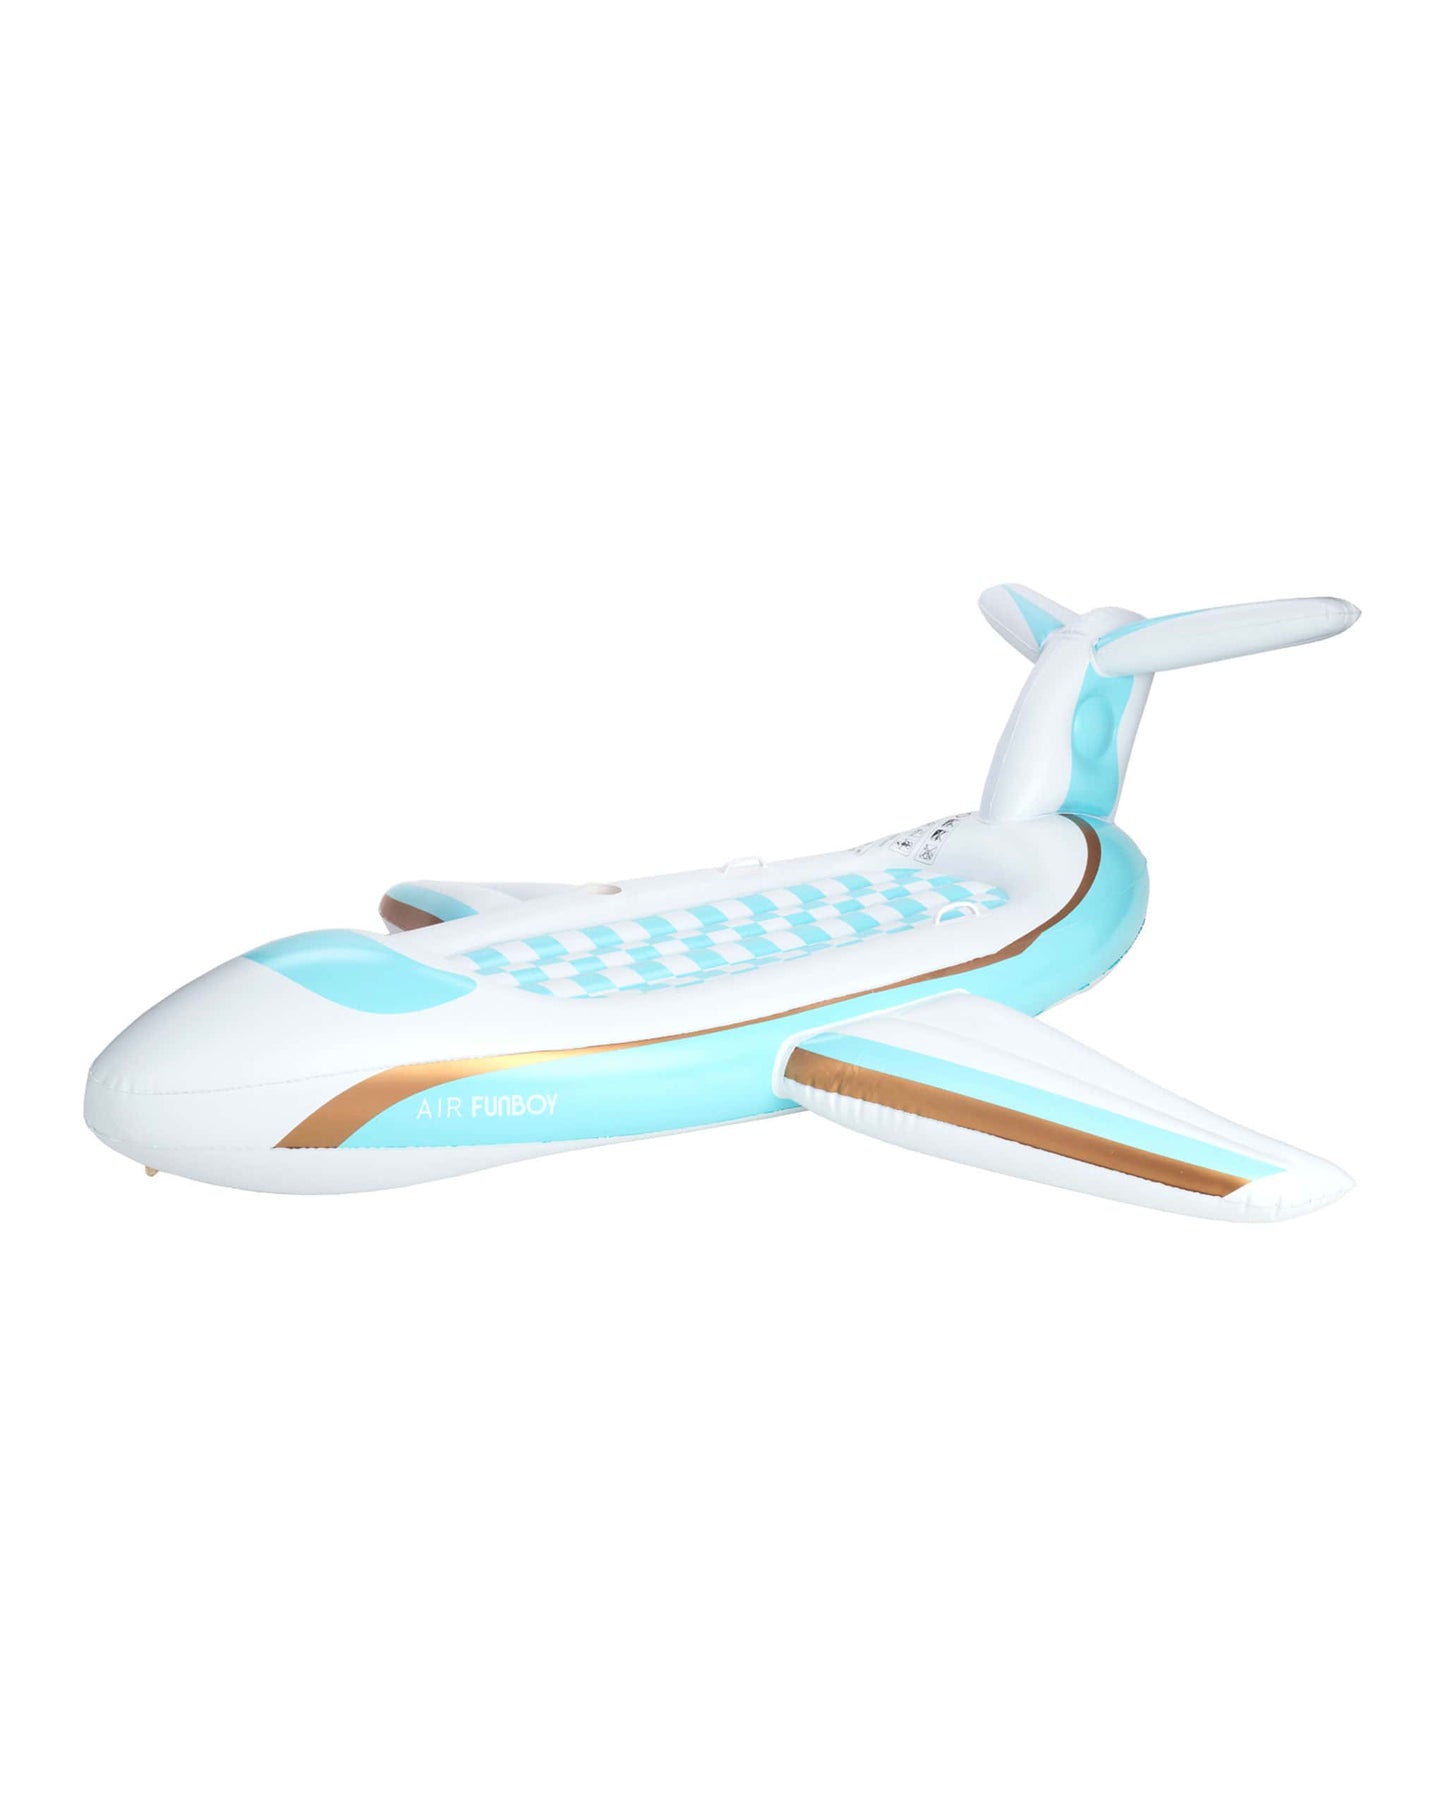 Inflatable Airplane Pool Float